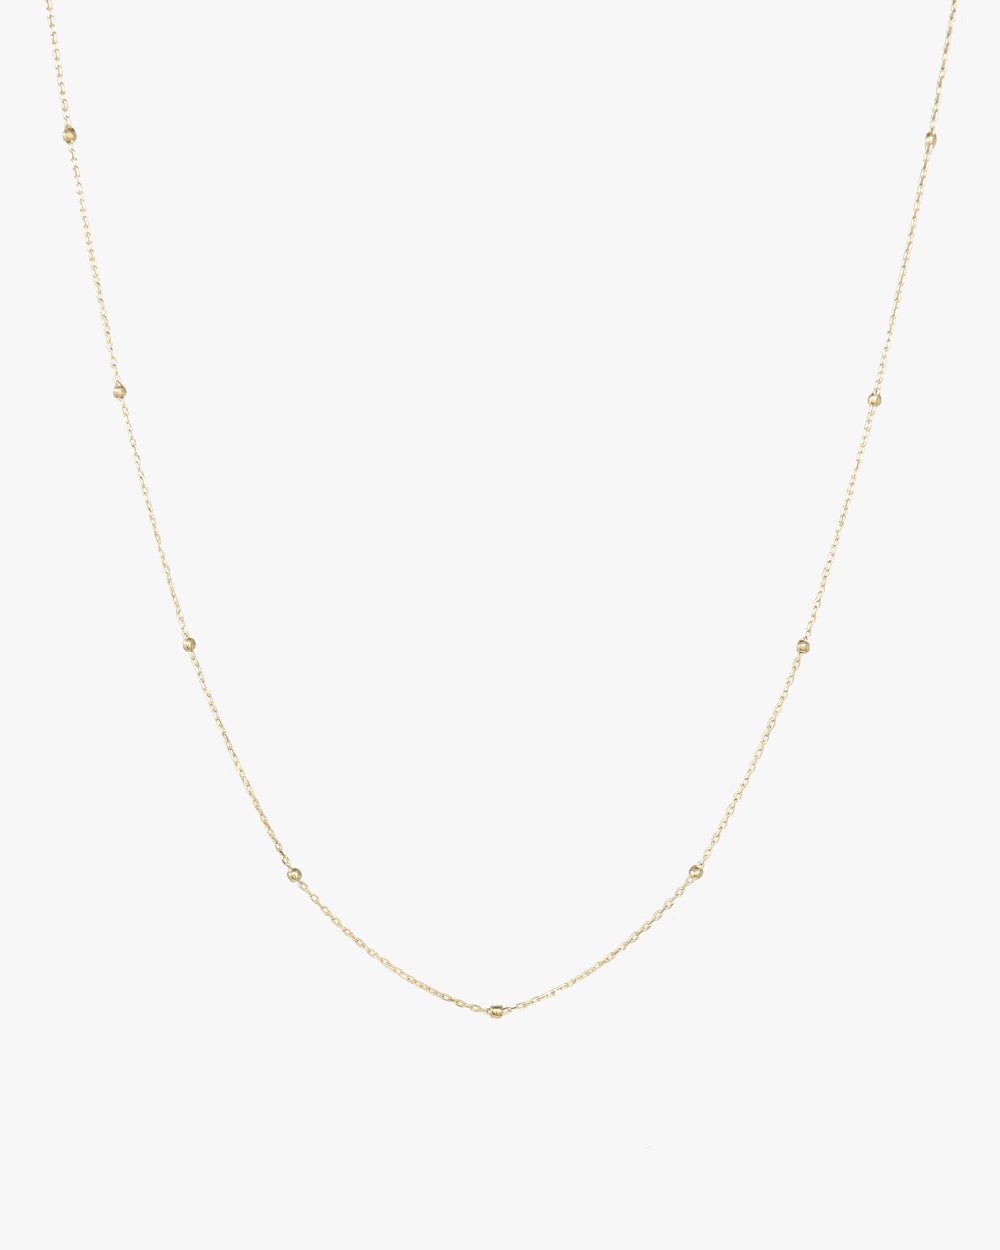 LOS FELIZ 14K GOLD DOTTED CHAIN - Shop Cupcakes and Cashmere